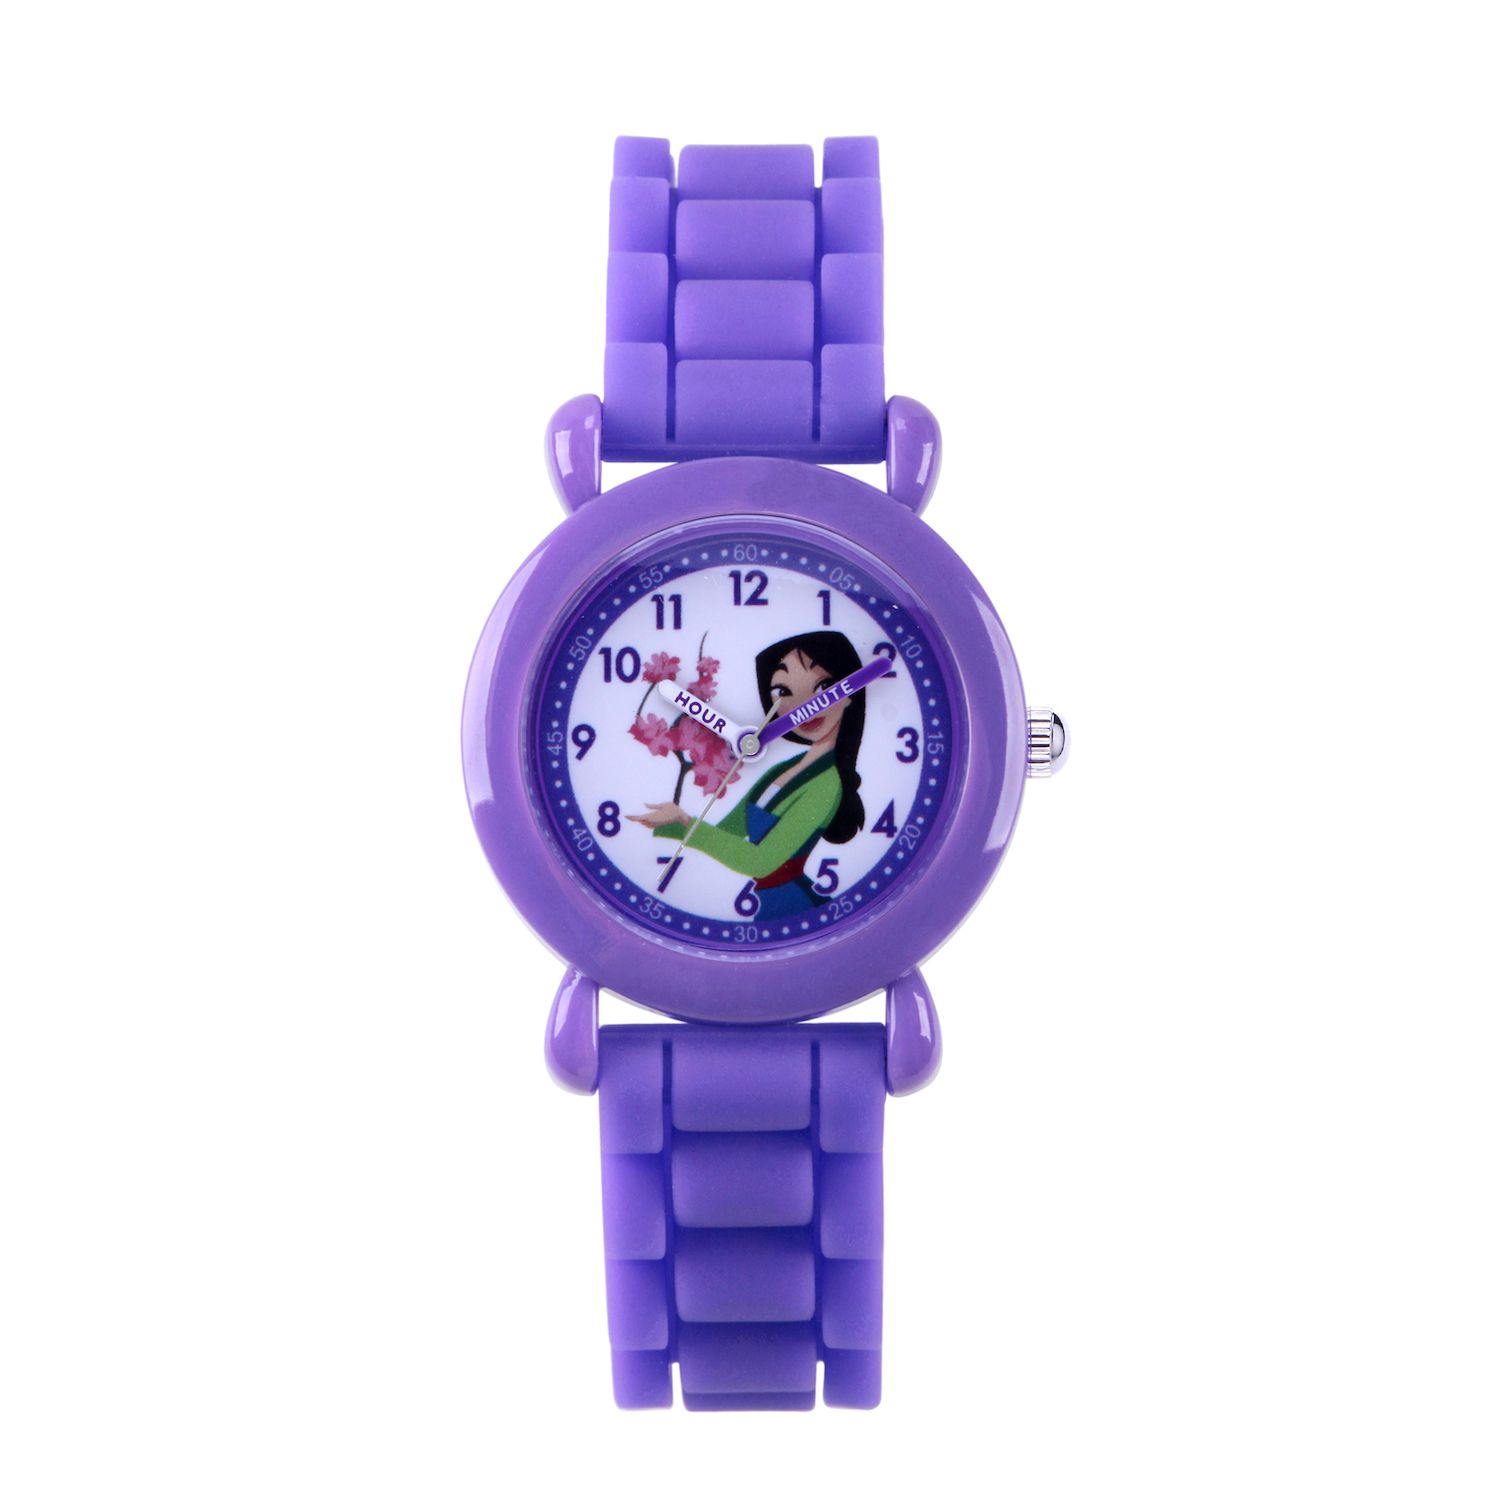 Image for Licensed Character Disney Princess Mulan Cherry Blossom Kids' Time Teacher Watch at Kohl's.